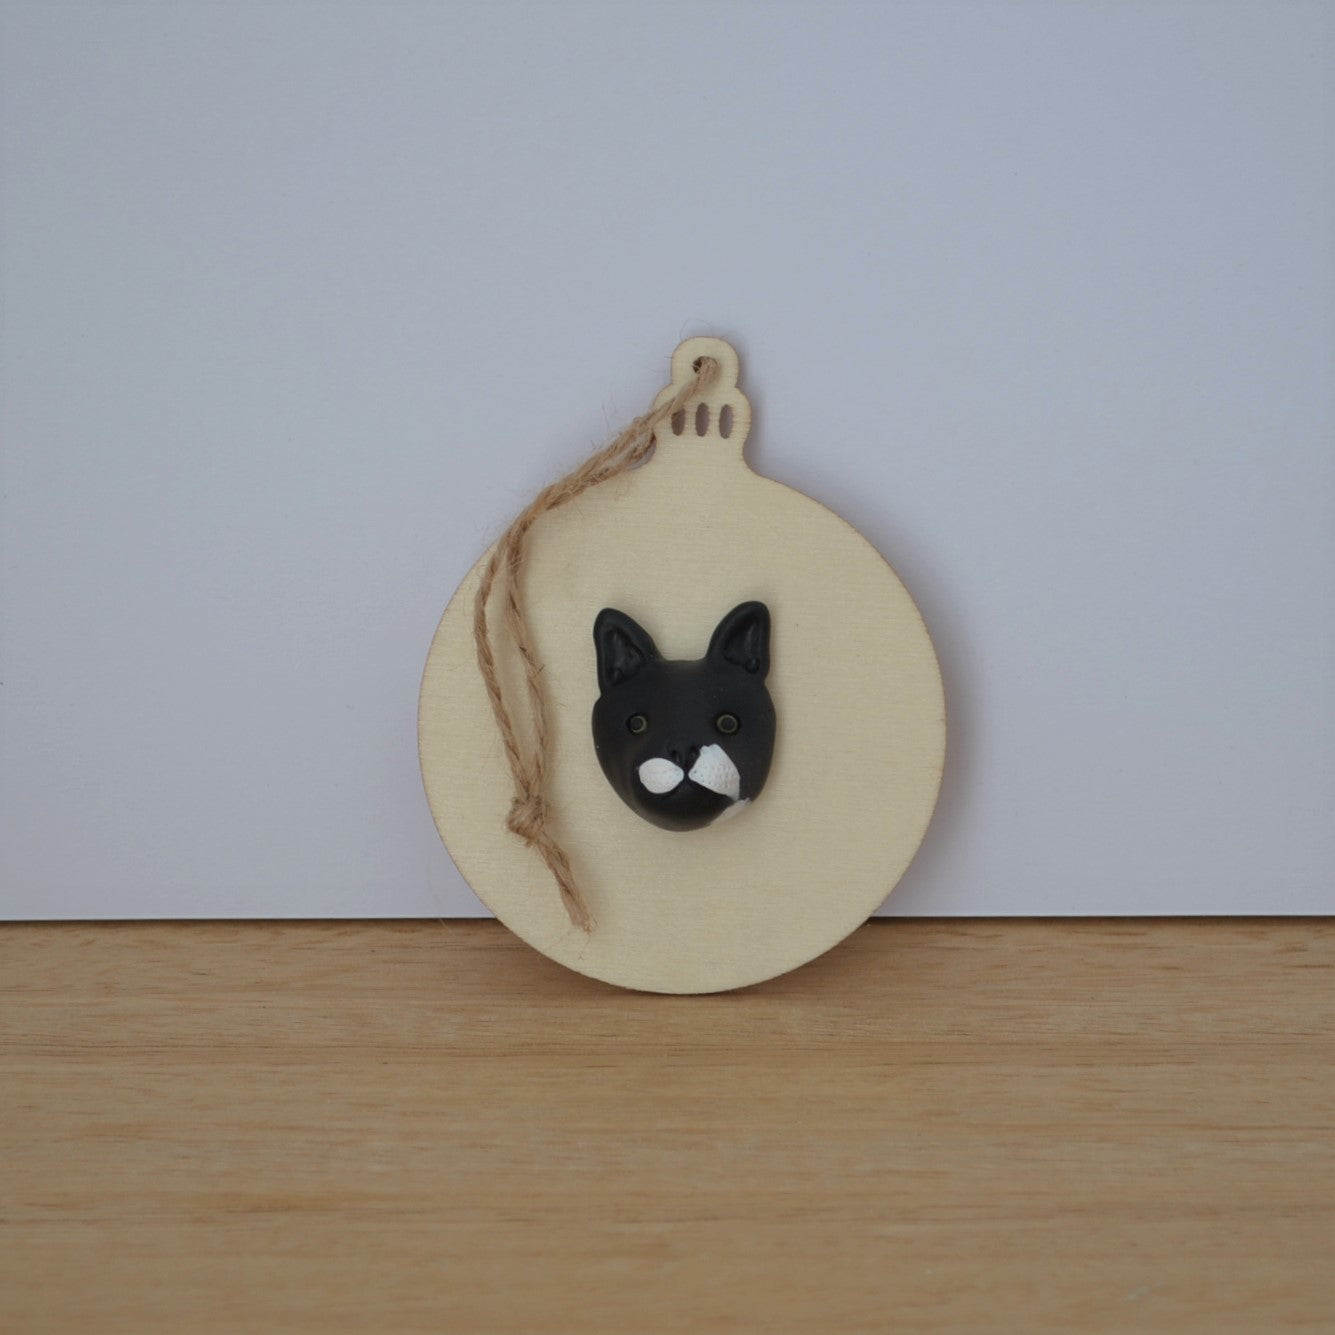 Bauble shaped timber Christmas ornament with polymer clay handmade cat face